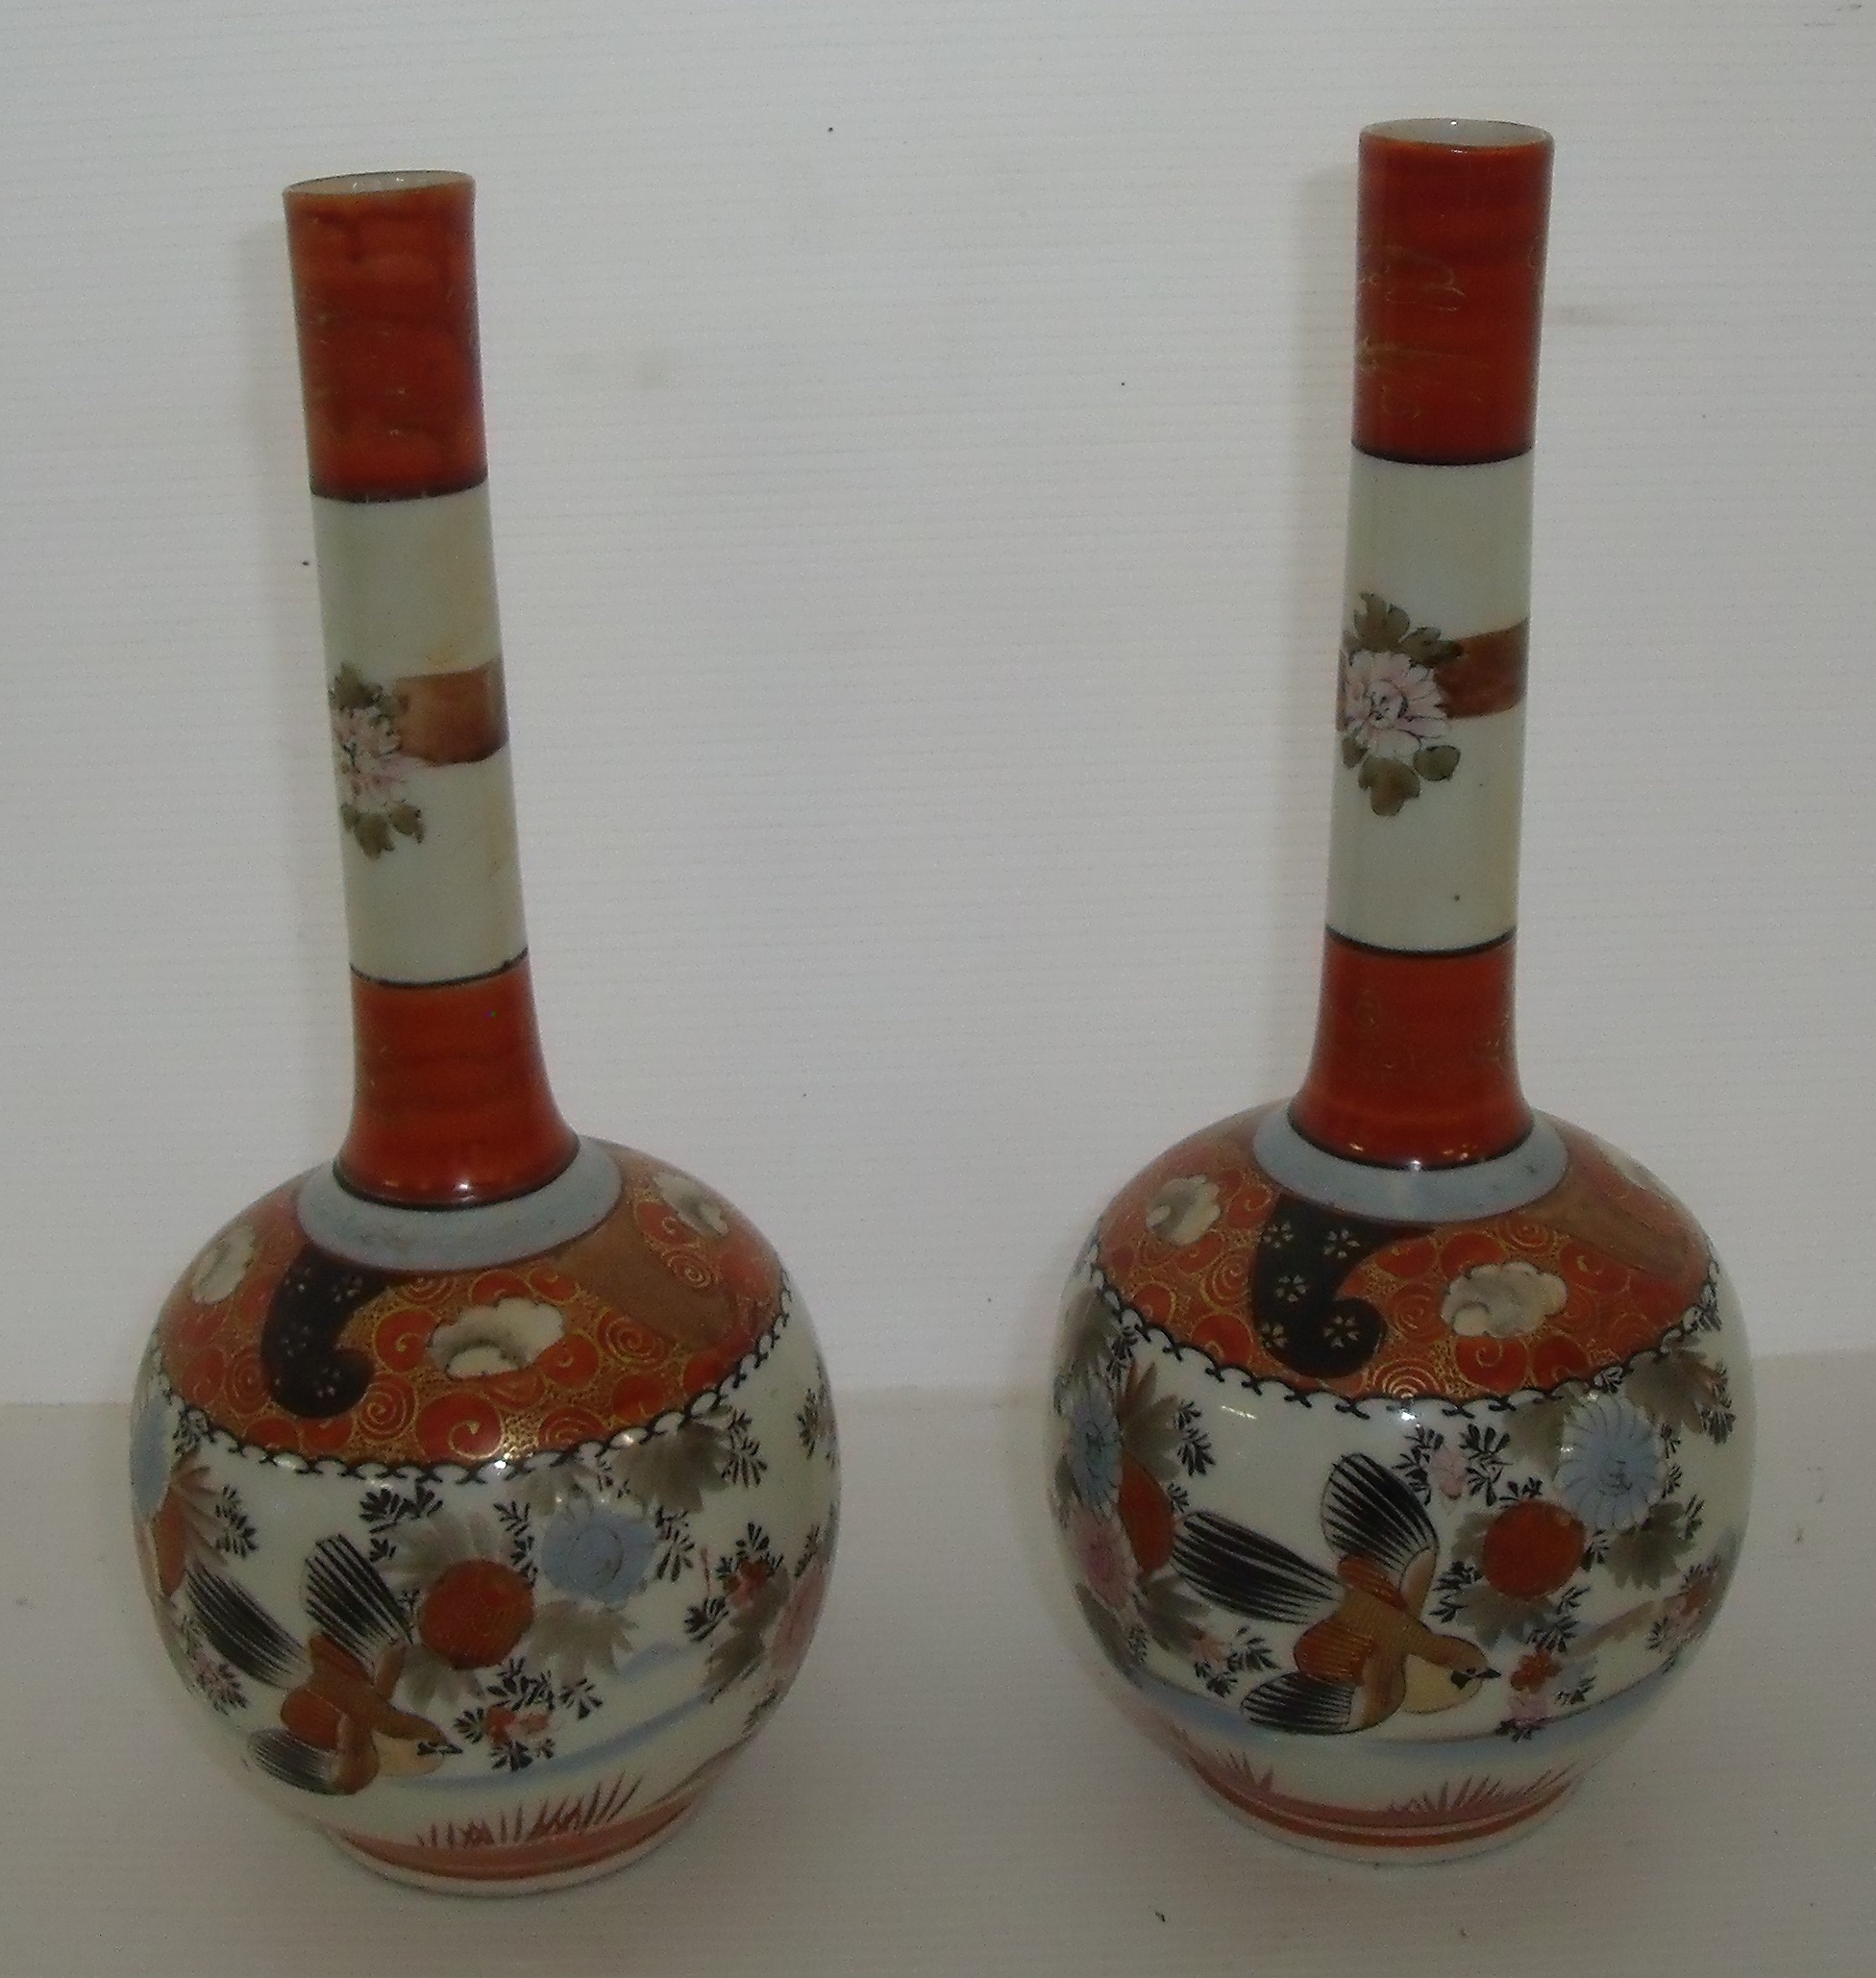 Pair of 19th C Chinese Kutani vases of globe and shaft form with stylized flowers and birds on a